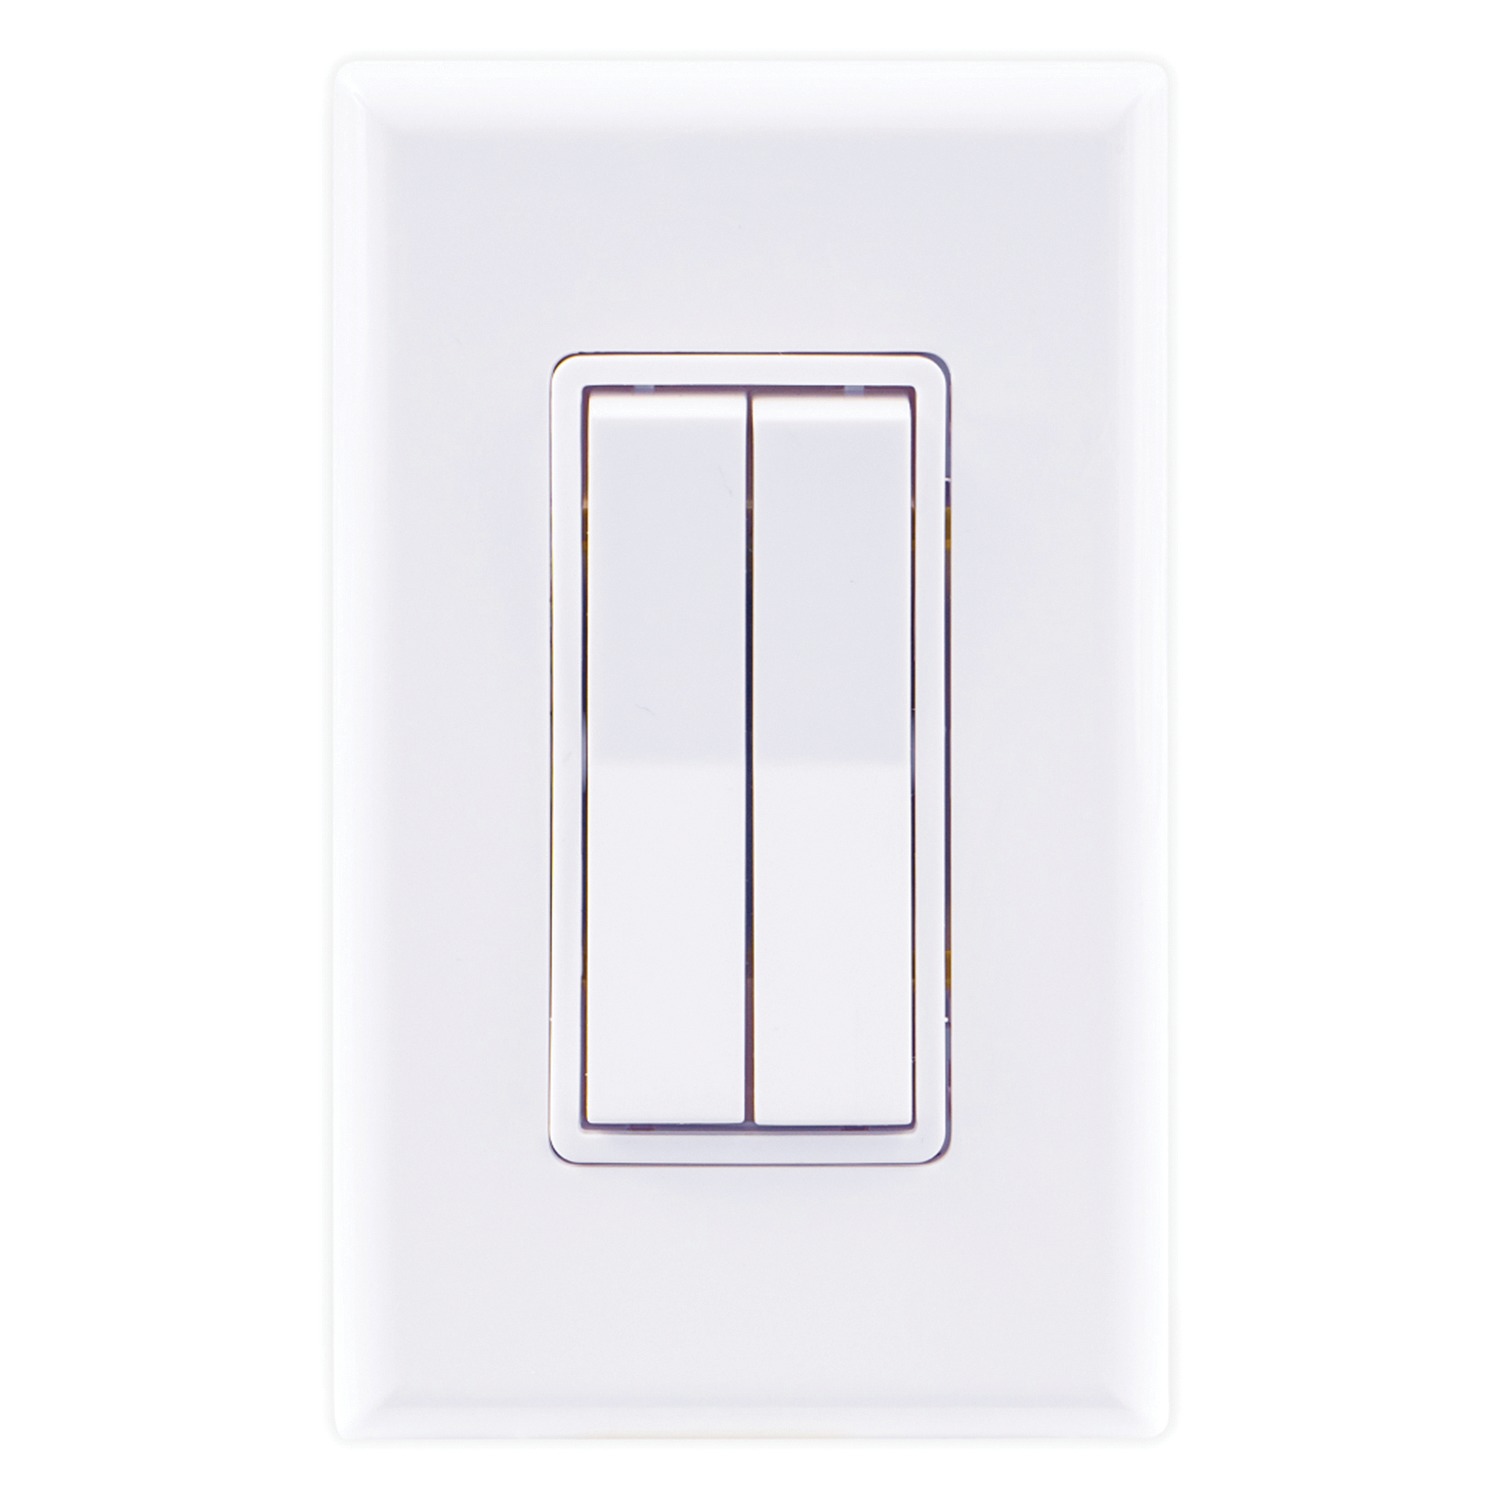 RunLessWire RW9-S2KWH 3-Way Wireless Light Switch Kit with 1 Controller and 2 Light Switches (White)